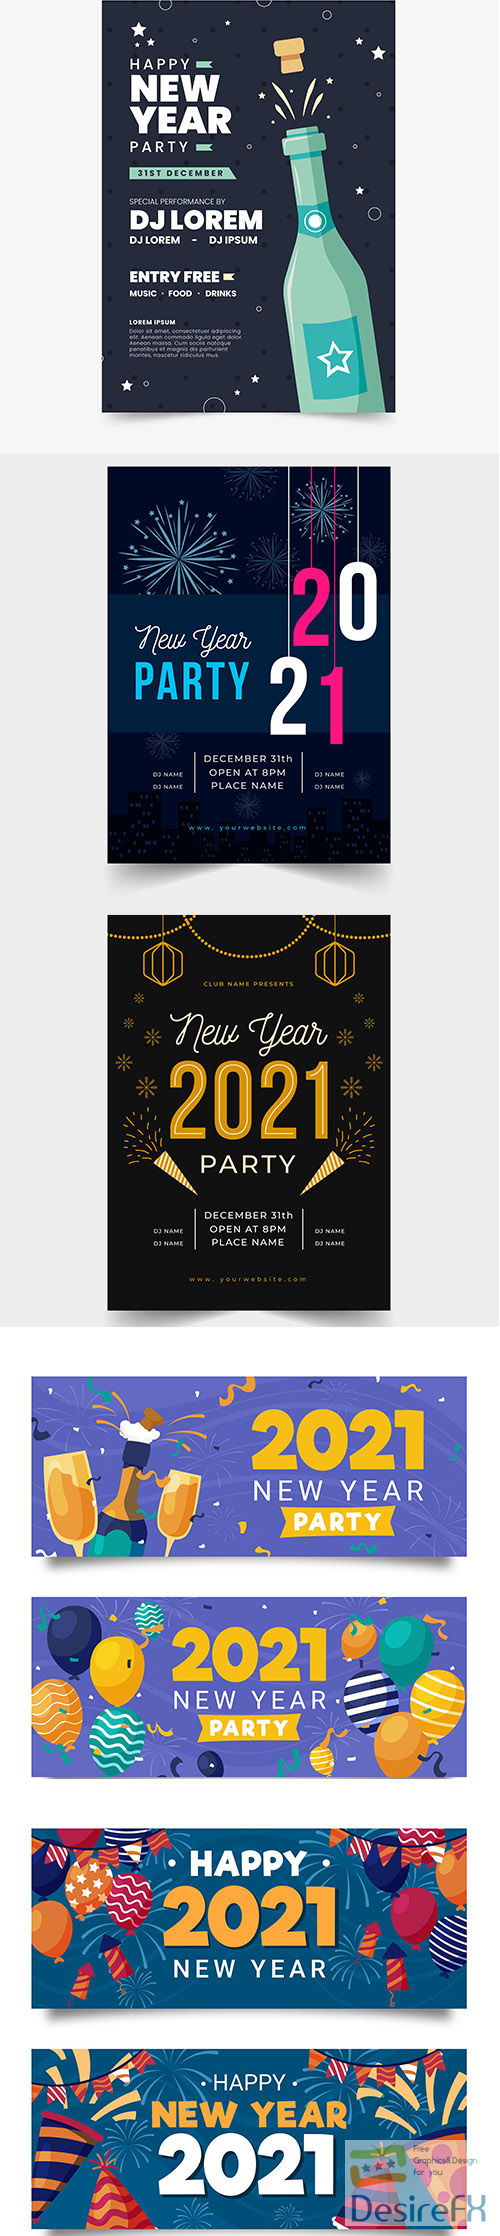 Hand-drawn new year party banners and poster template